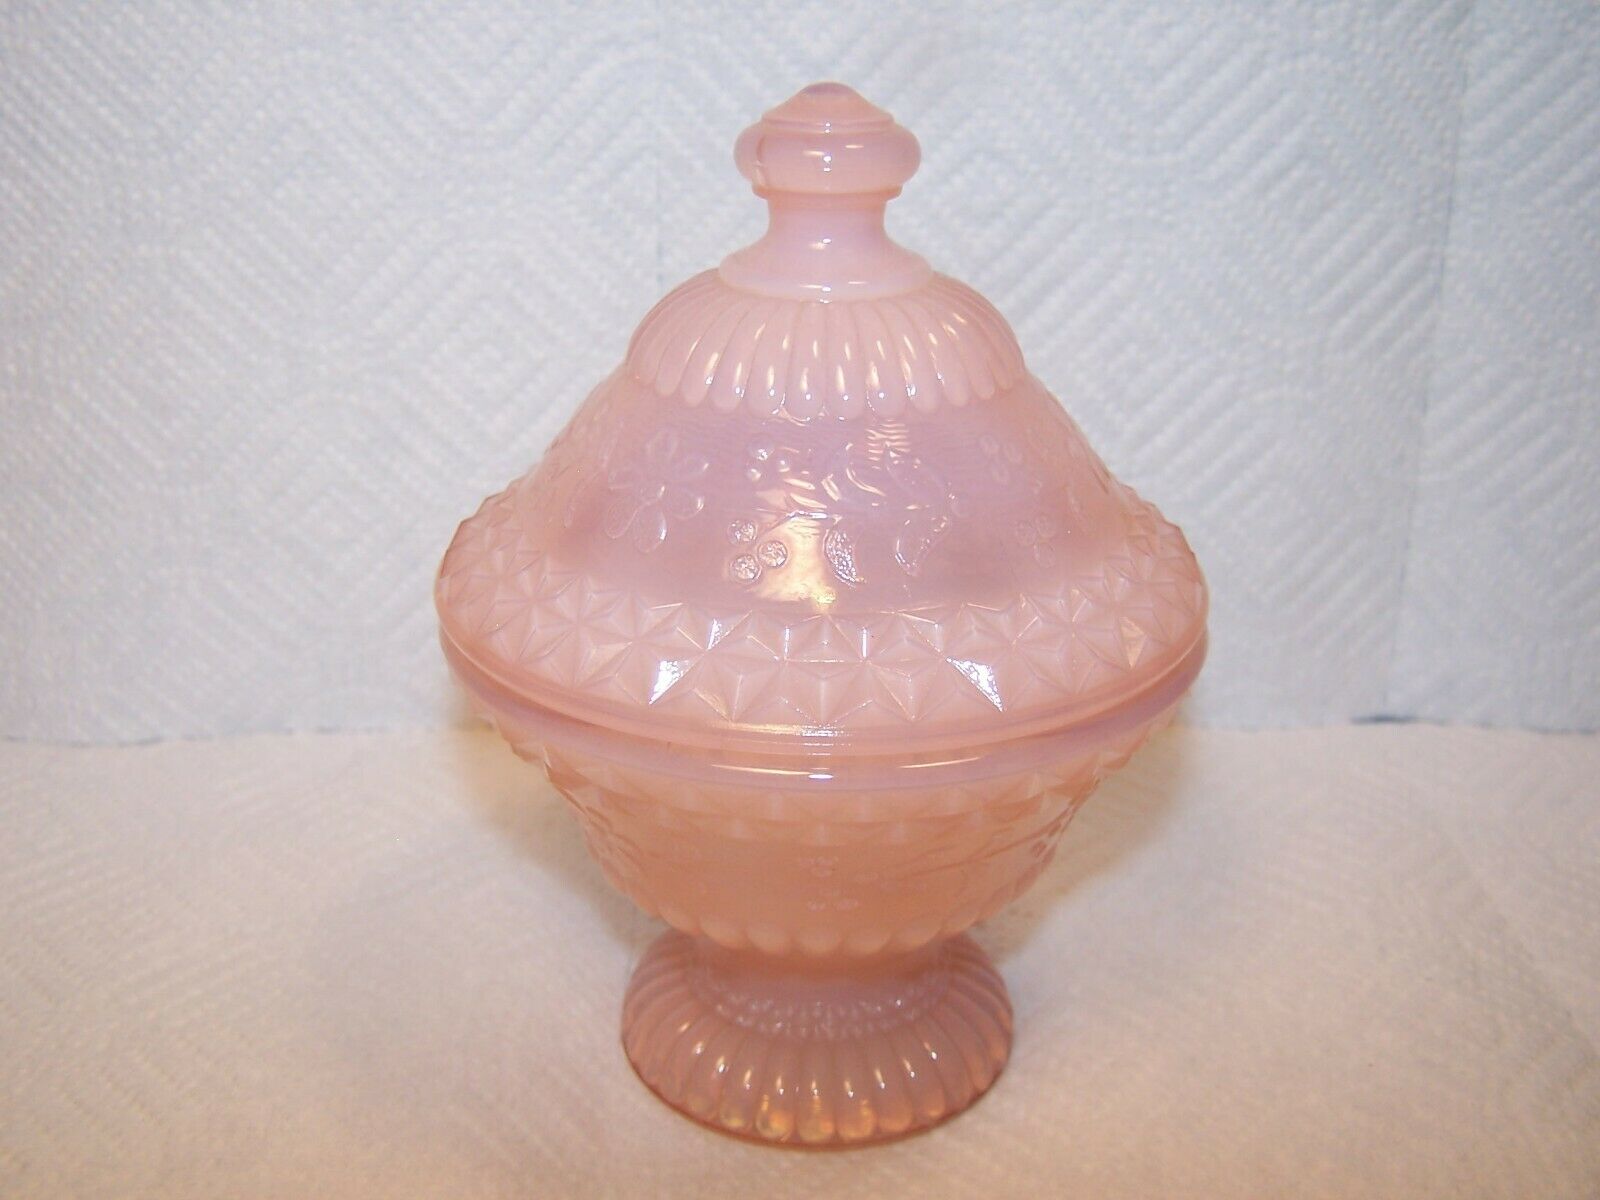 Degenhart Glass Wildflowers Covered Candy Dish Pink Crown Tuscan Color Pedestal